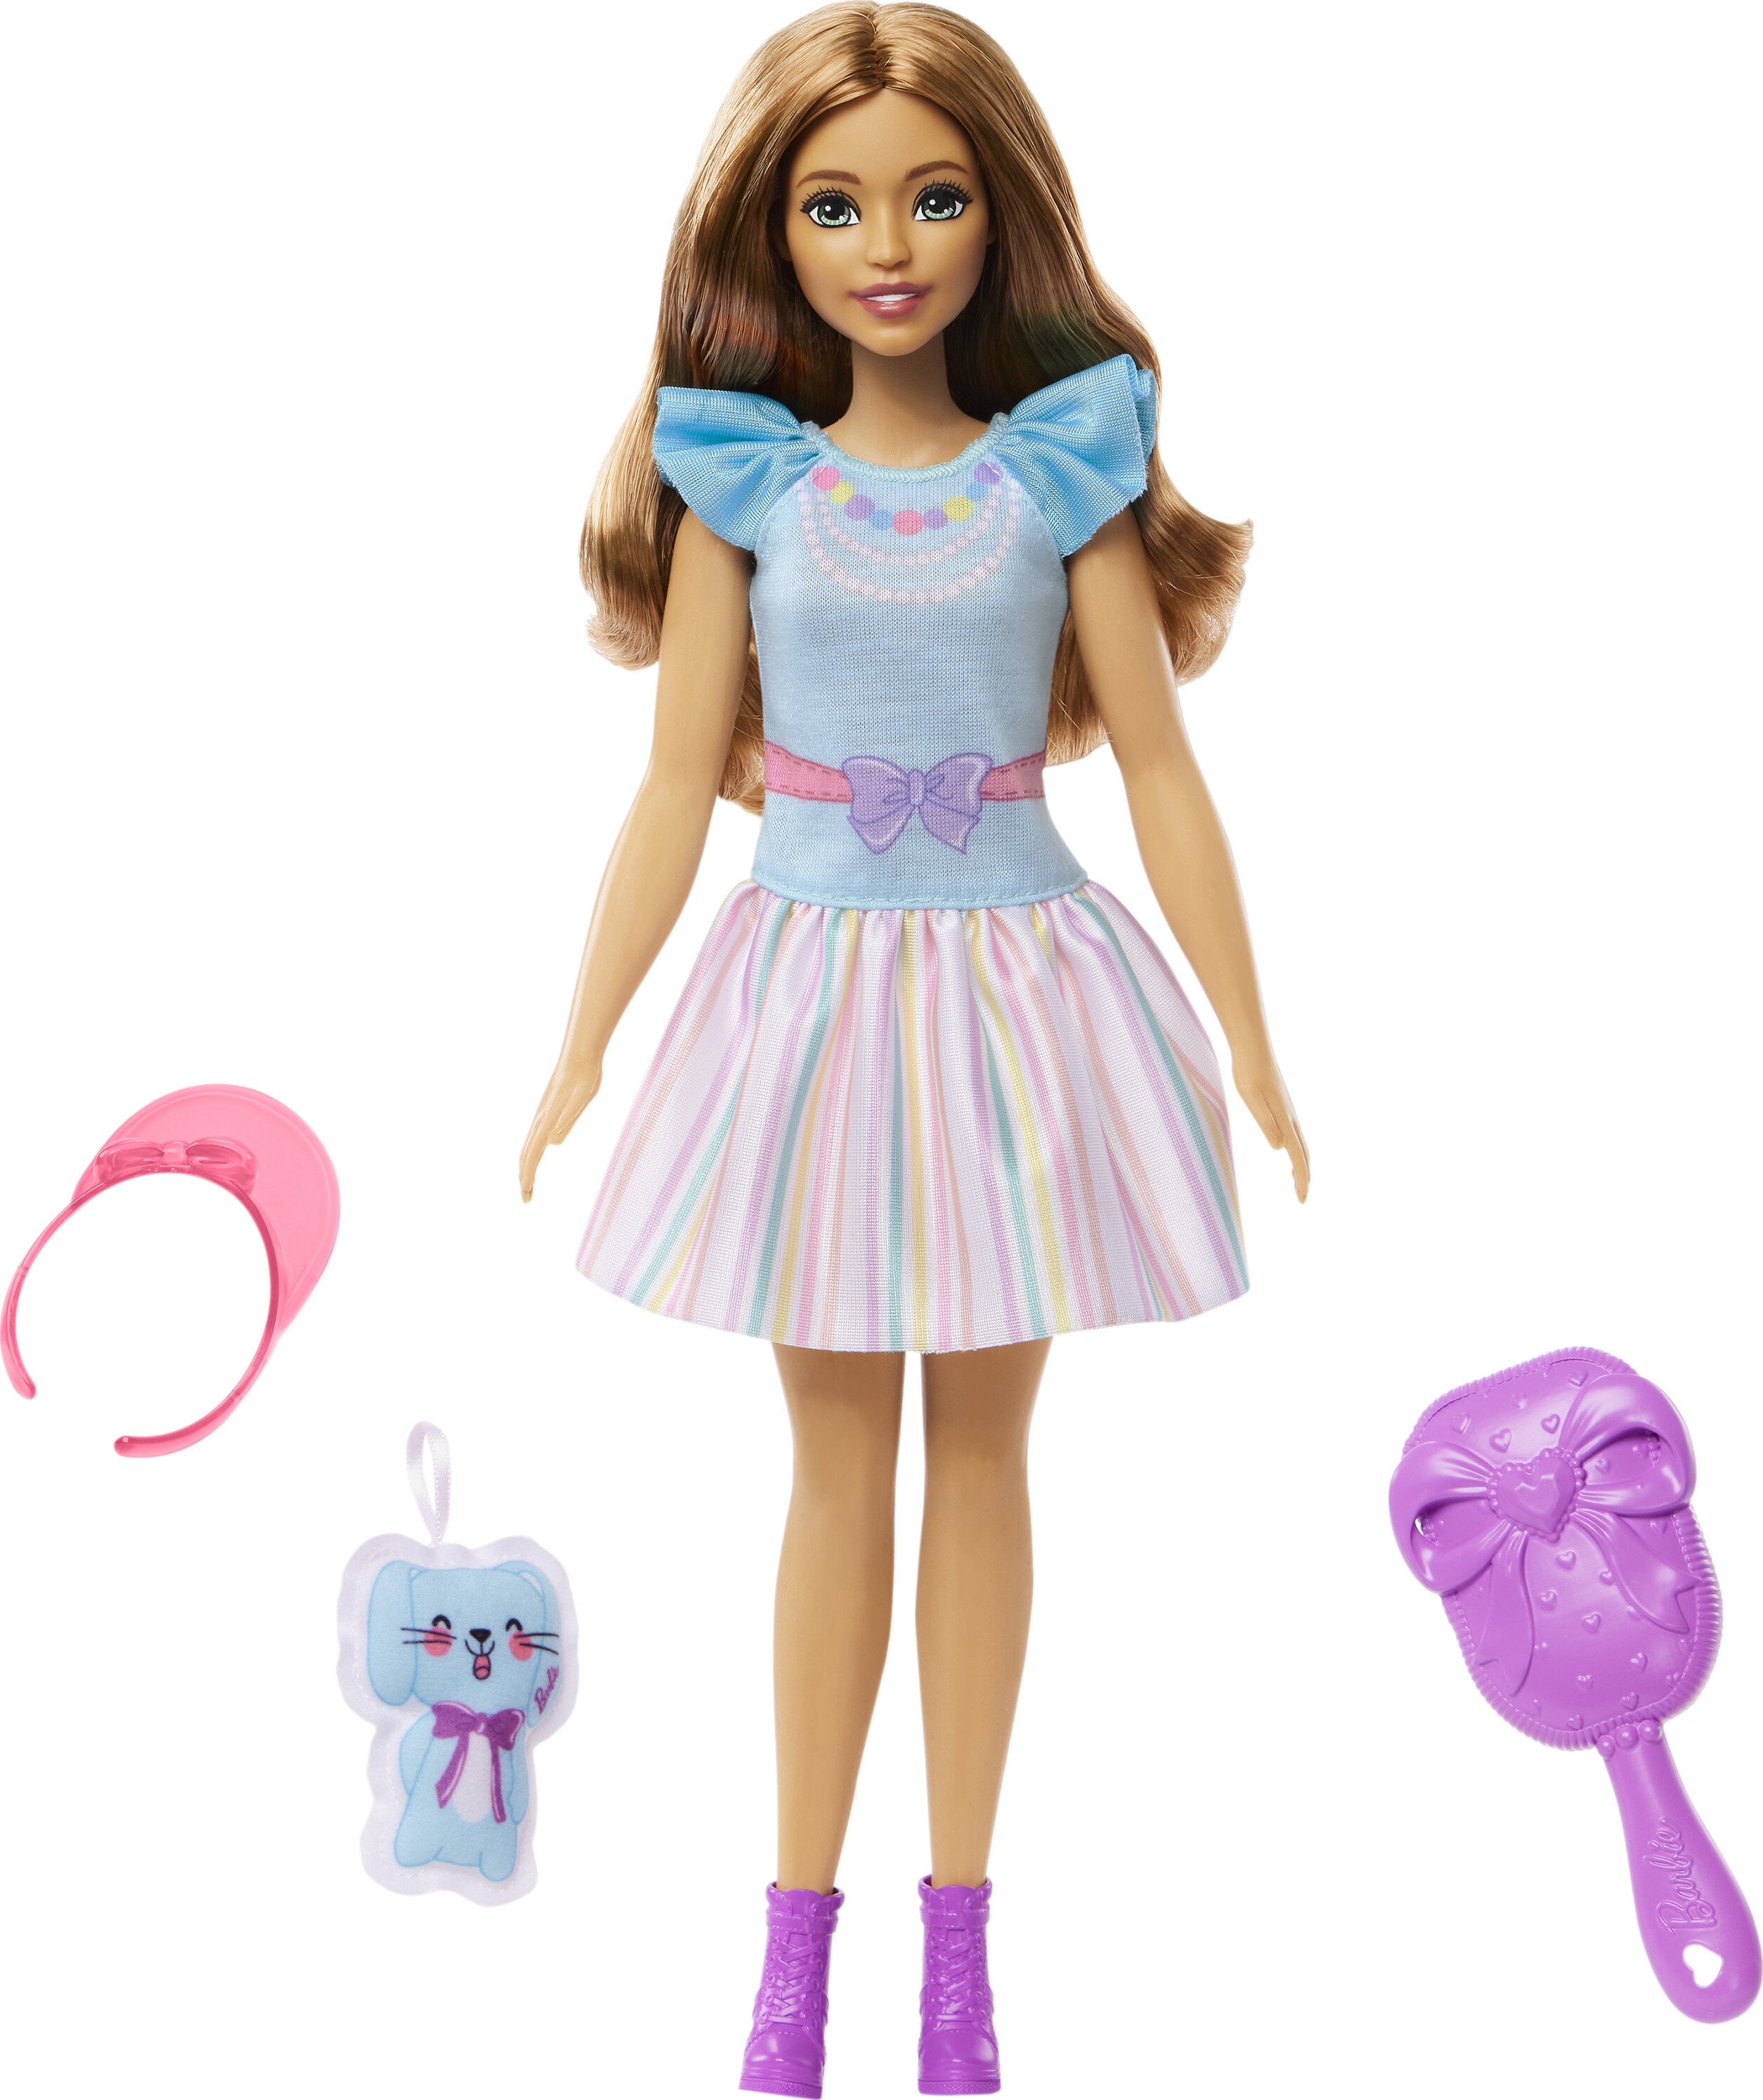 My First Barbie Teresa Preschool Doll with Soft Posable Body, Bunny & Accessories, 13.5-inch